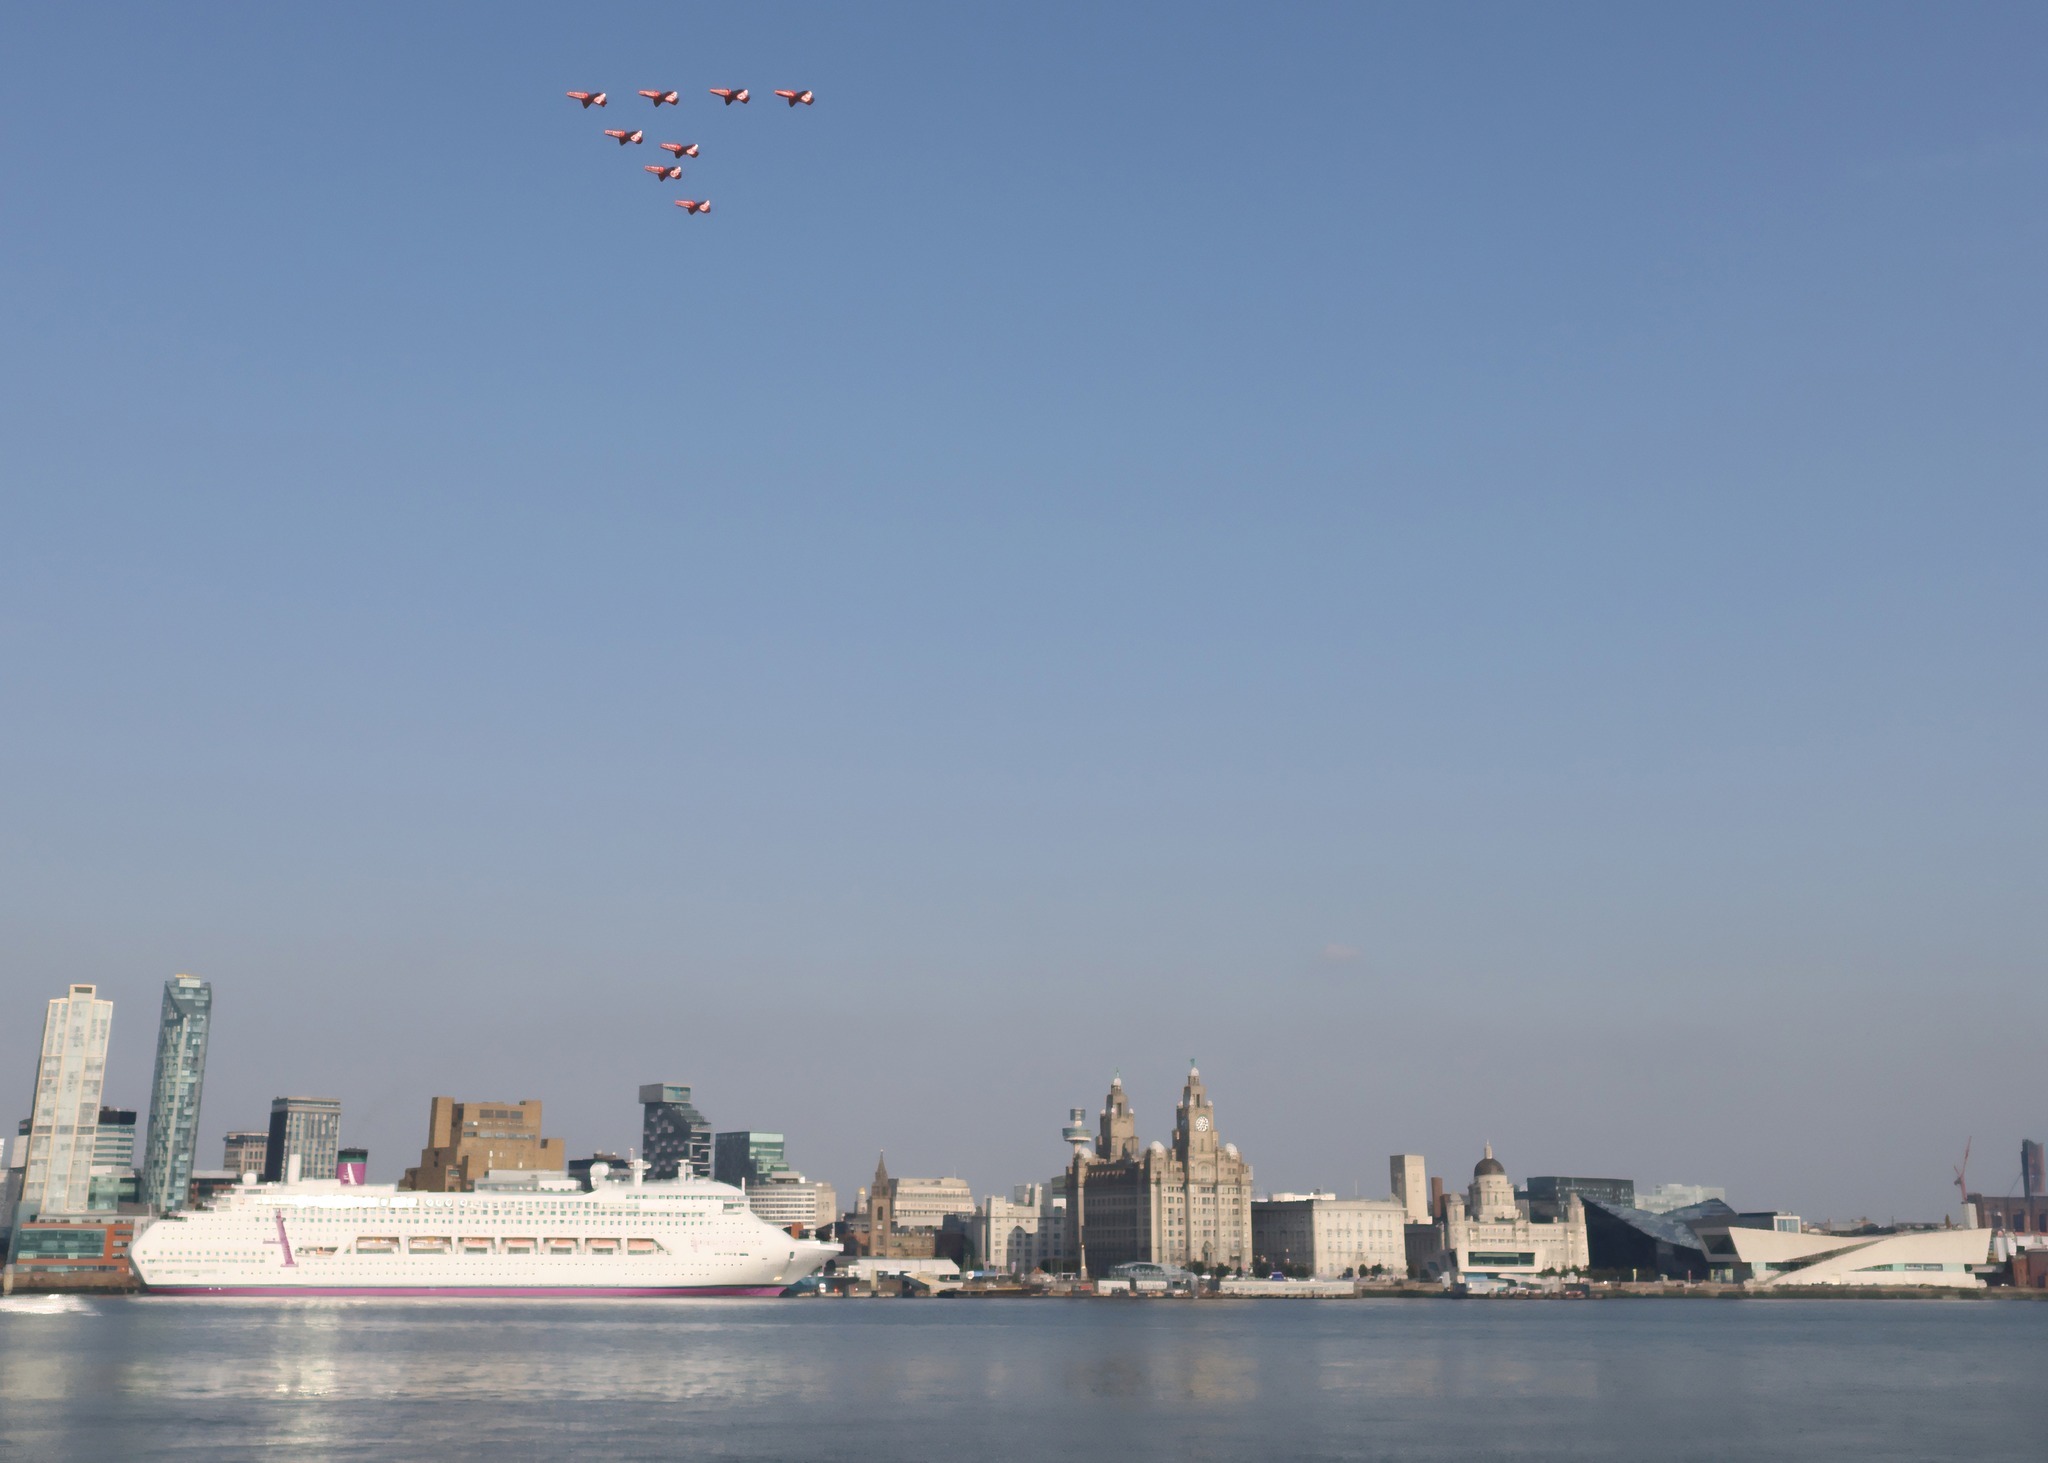 The Red Arrows at Seacombe by Ray Yu